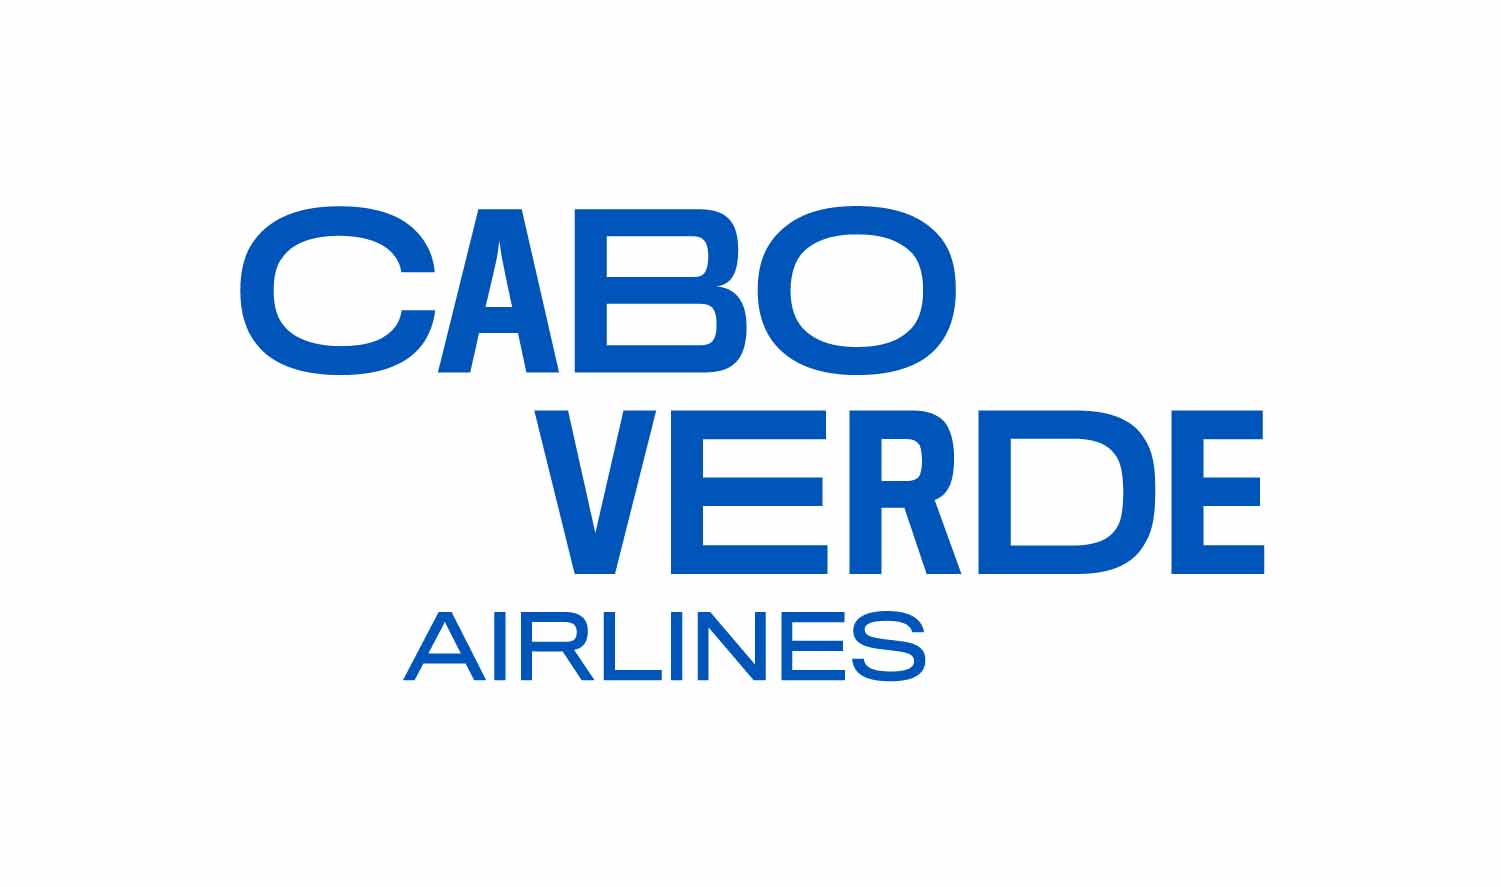 Cabo Verde Airlines logo_azul